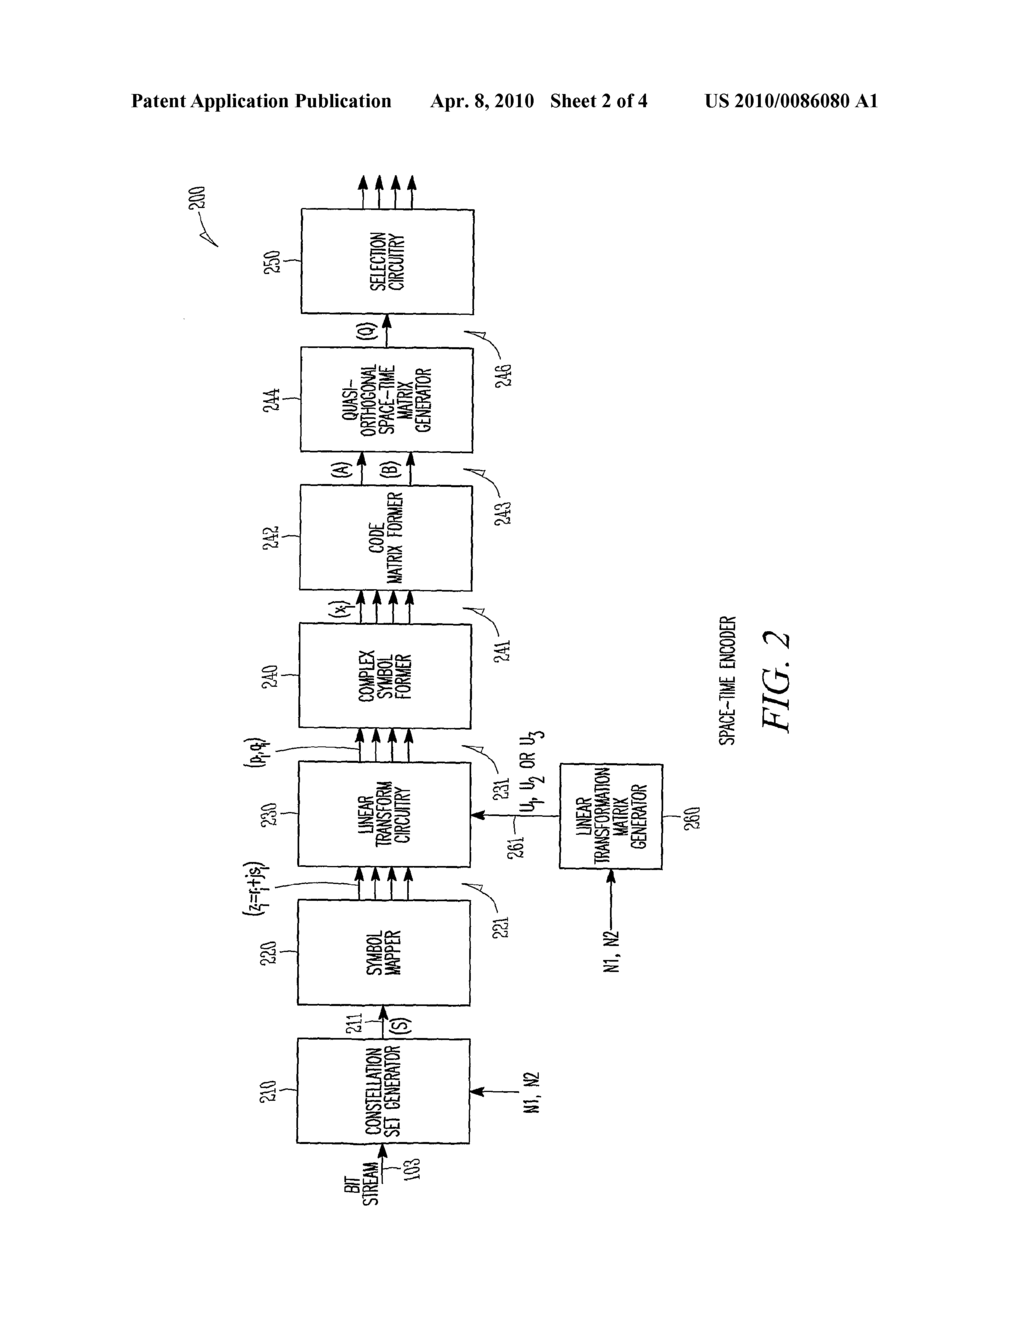 QUASI-ORTHOGONAL SPACE-TIME BLOCK ENCODER, DECODER AND METHODS FOR SPACE-TIME ENCODING AND DECODING ORTHOGONAL FREQUENCY DIVISION MULTIPLEXED SIGNALS IN A MULTIPLE-INPUT MULTIPLE-OUTPUT SYSTEM - diagram, schematic, and image 03